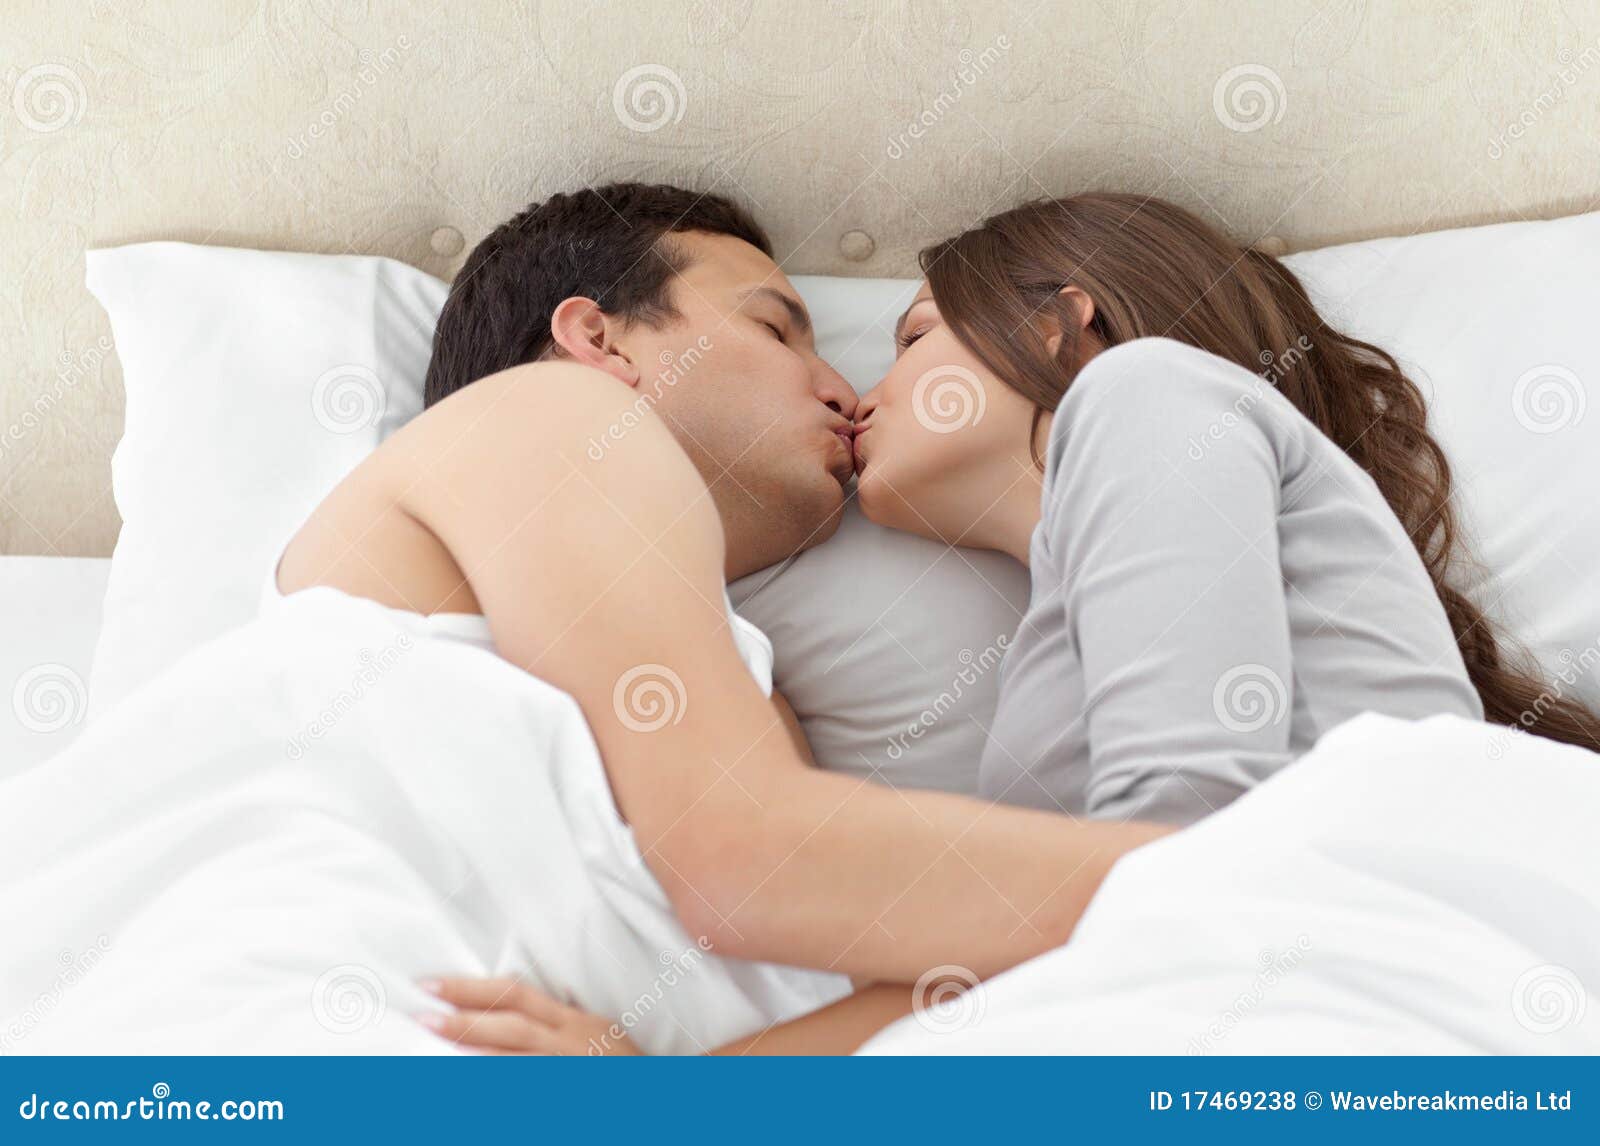 6,621 Lovely Couple Kissing Stock Photos - Free & Royalty-Free ...